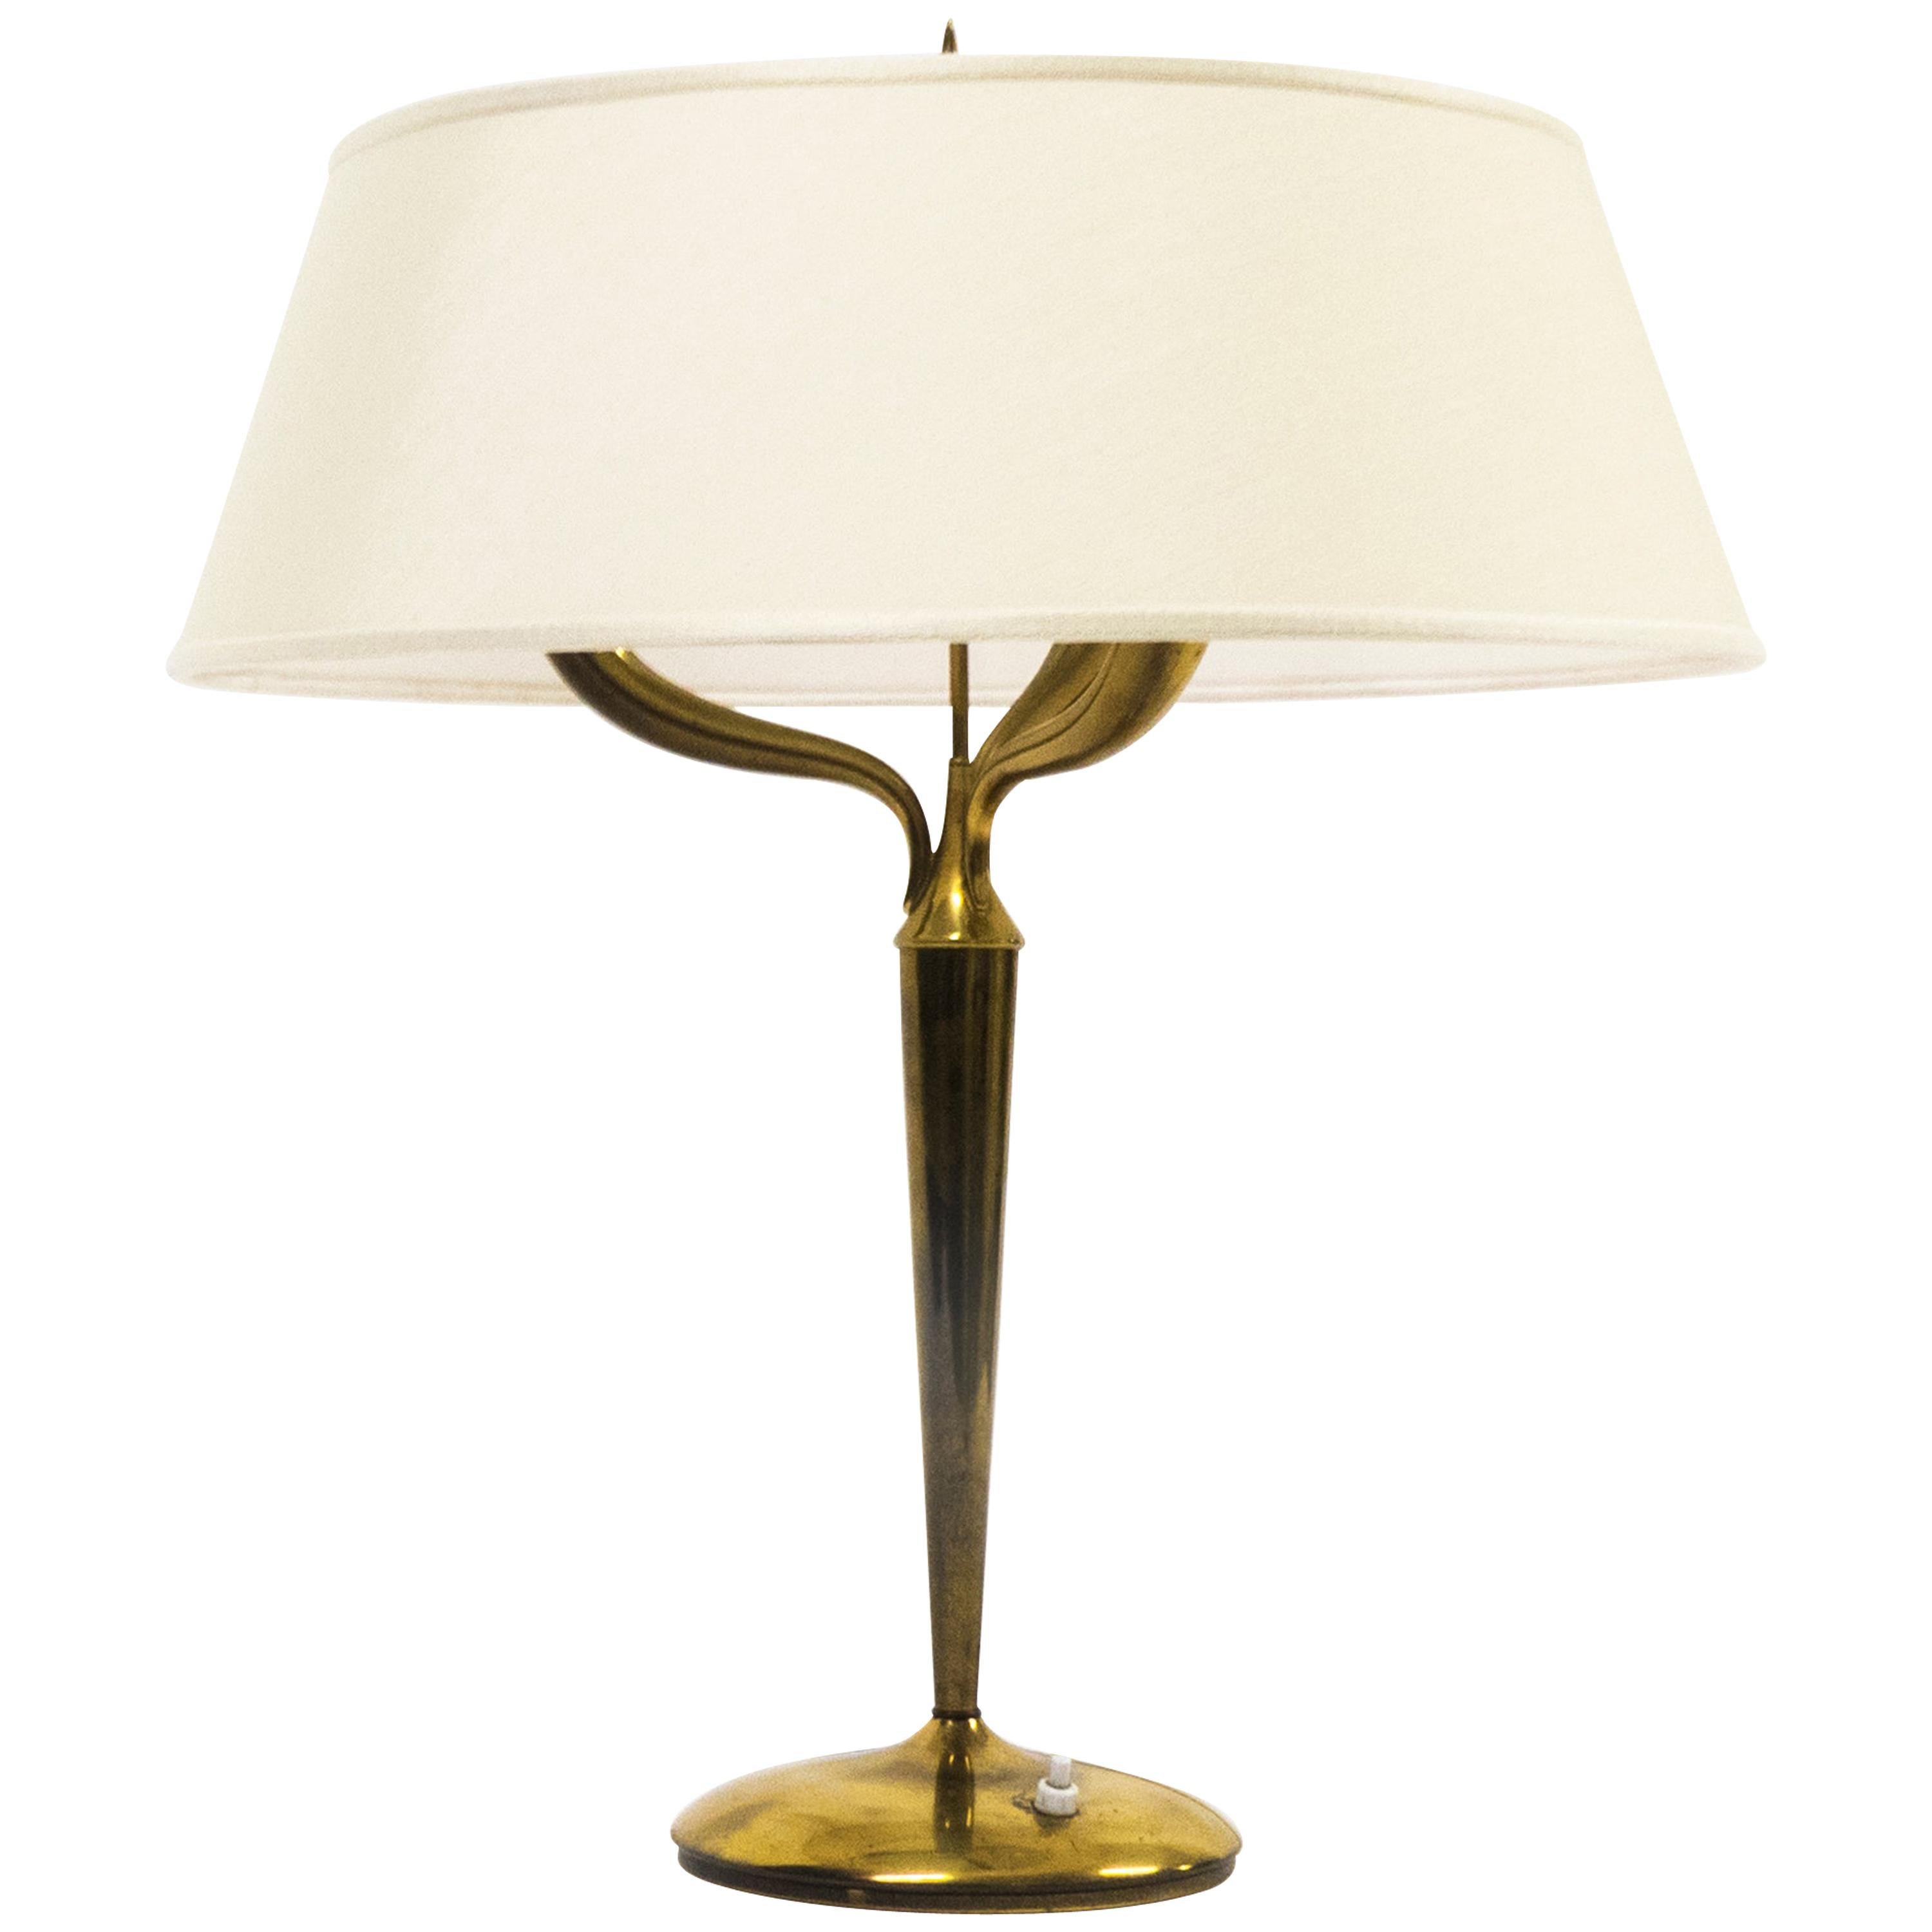 Emilio Lancia Modern Brass Tall Table Lamp, 1940s For Sale